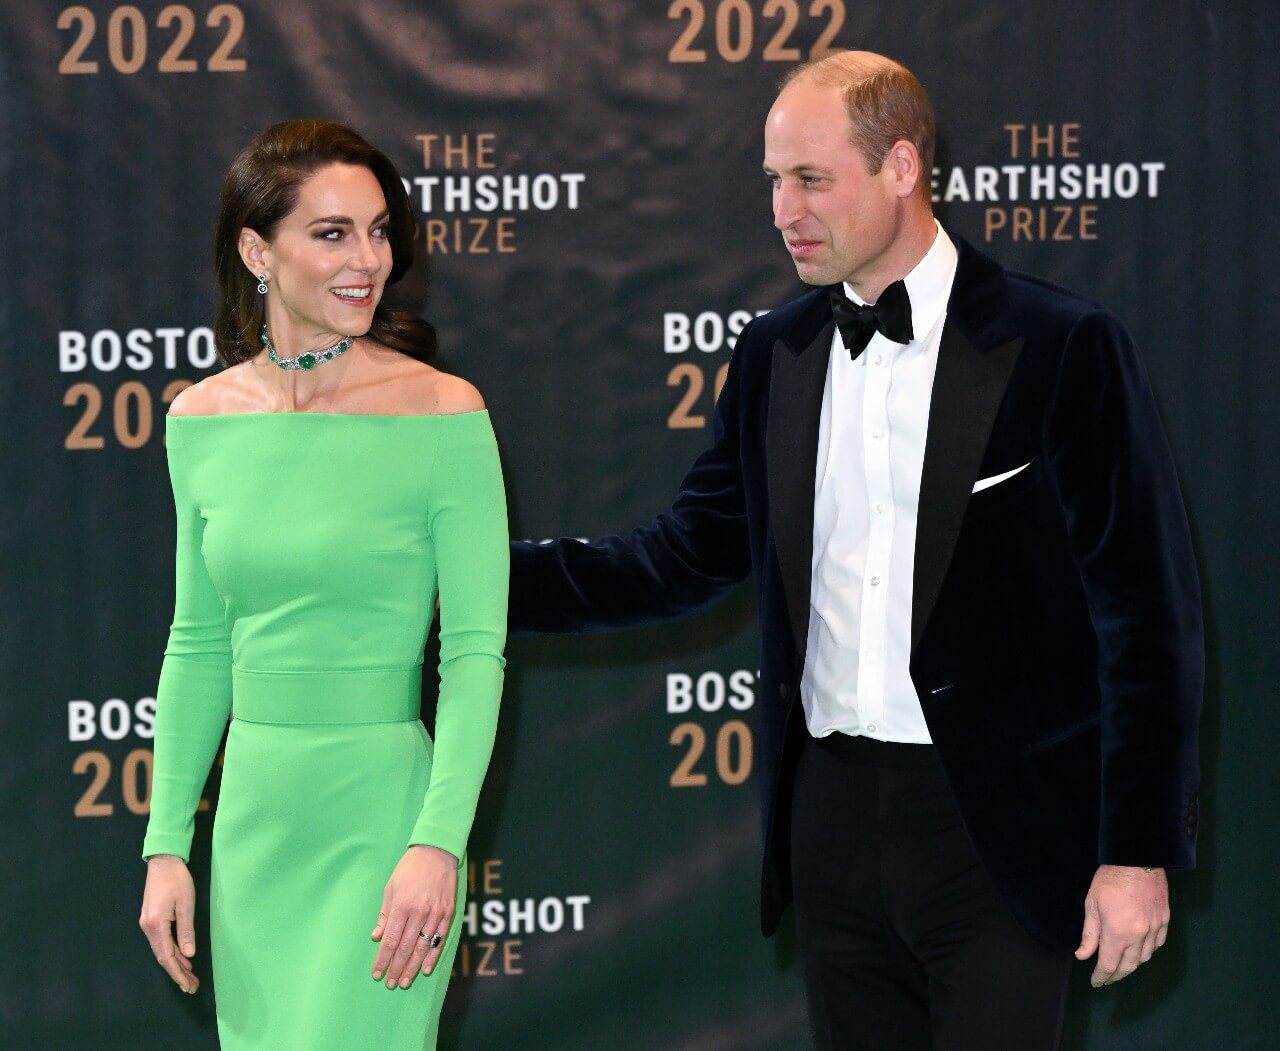 Kate Middleton wears a green dress to the Earthshot Prize Awards as she stands next to Prince William.